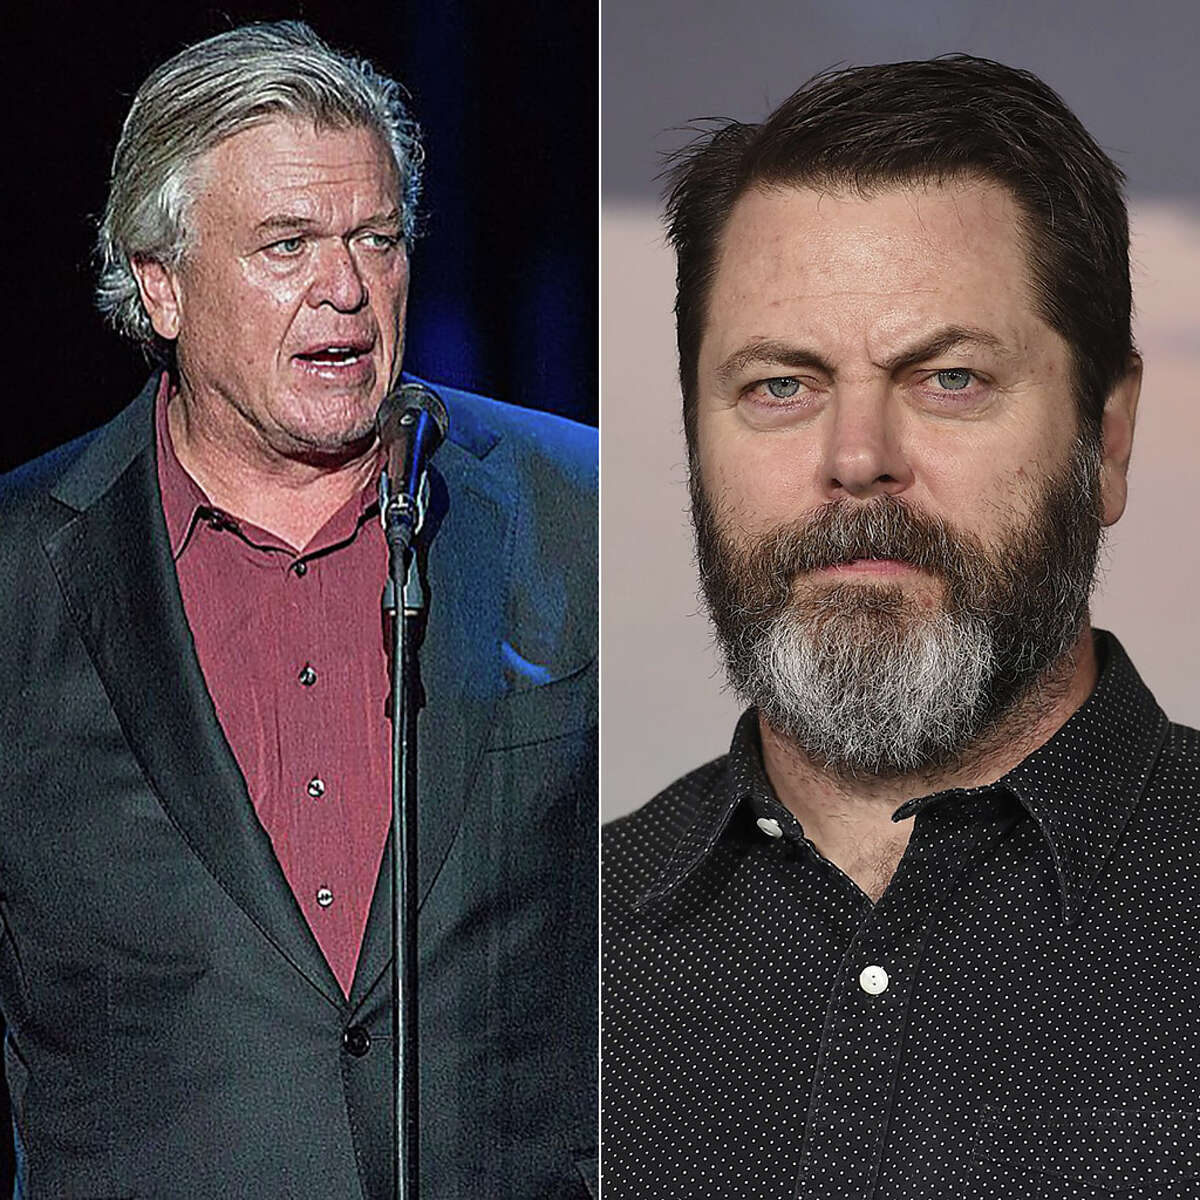 Comedians Ron White and Nick Offerman are coming to Palace Theatre for separate shows in October. Keep clicking for more big concerts and other shows coming soon.